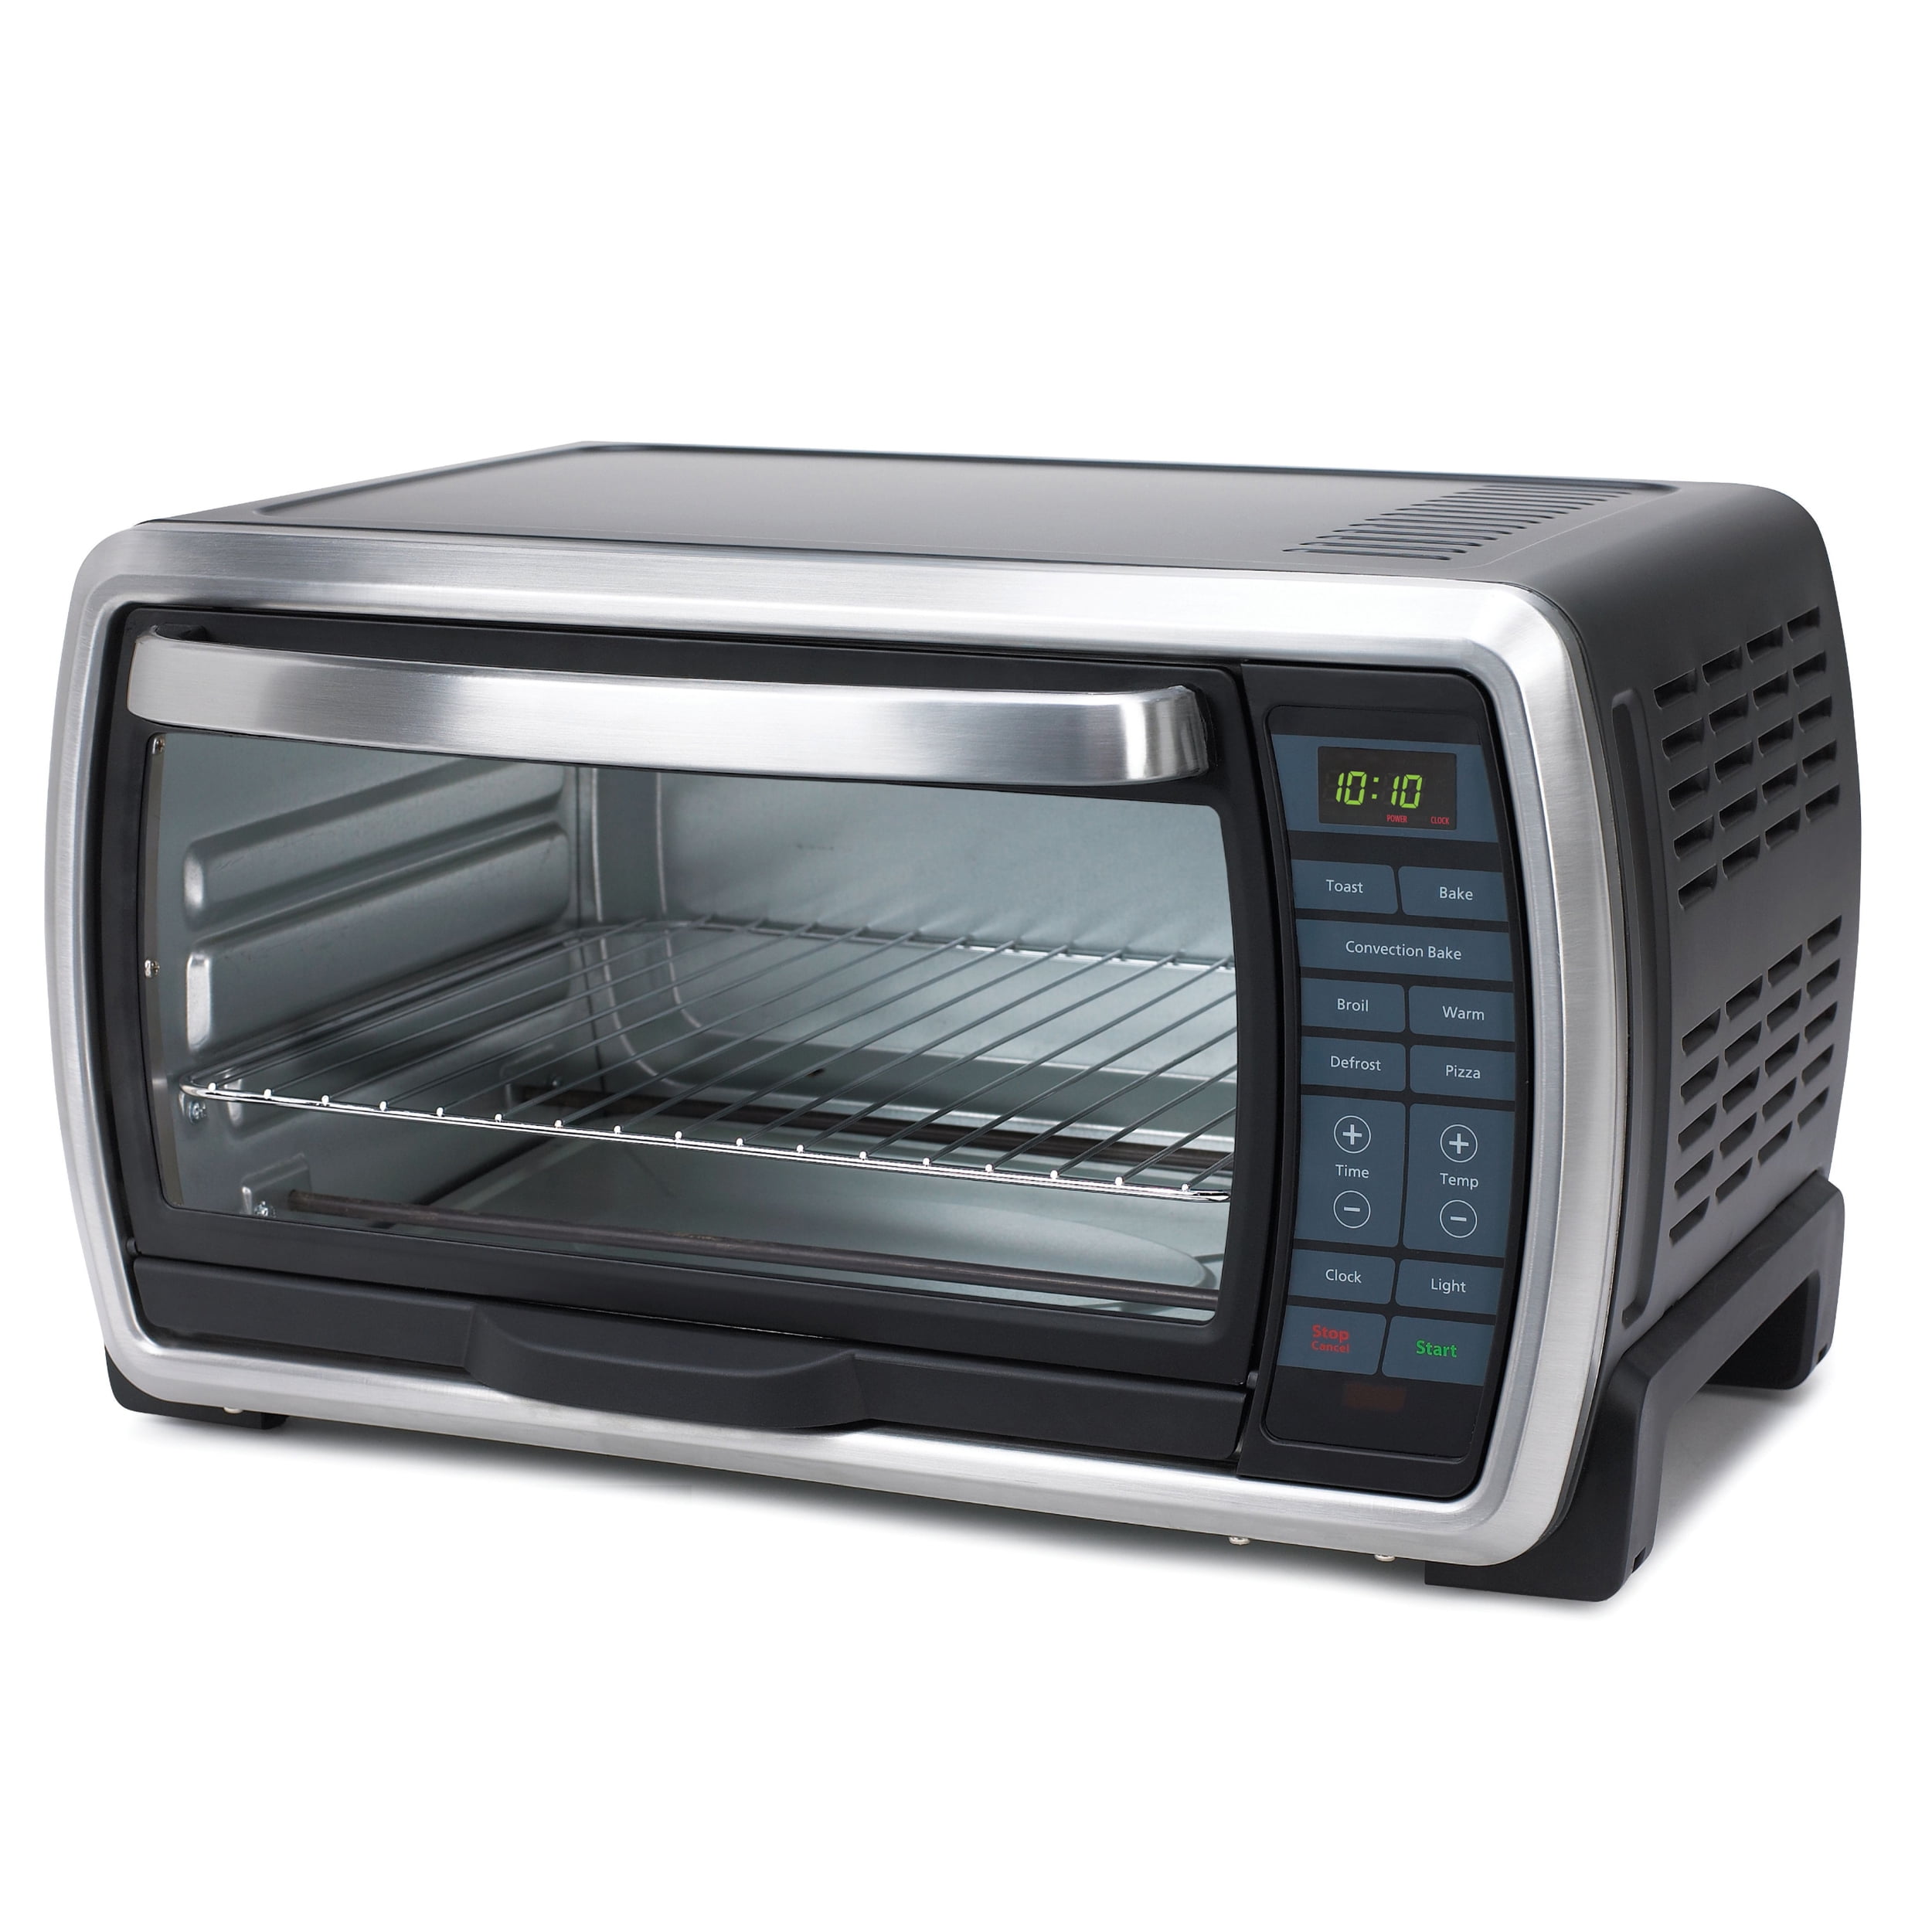 Oster French Door Turbo Convection Toaster Oven with Extra Large Interior,  Black, 1 Piece - Fred Meyer